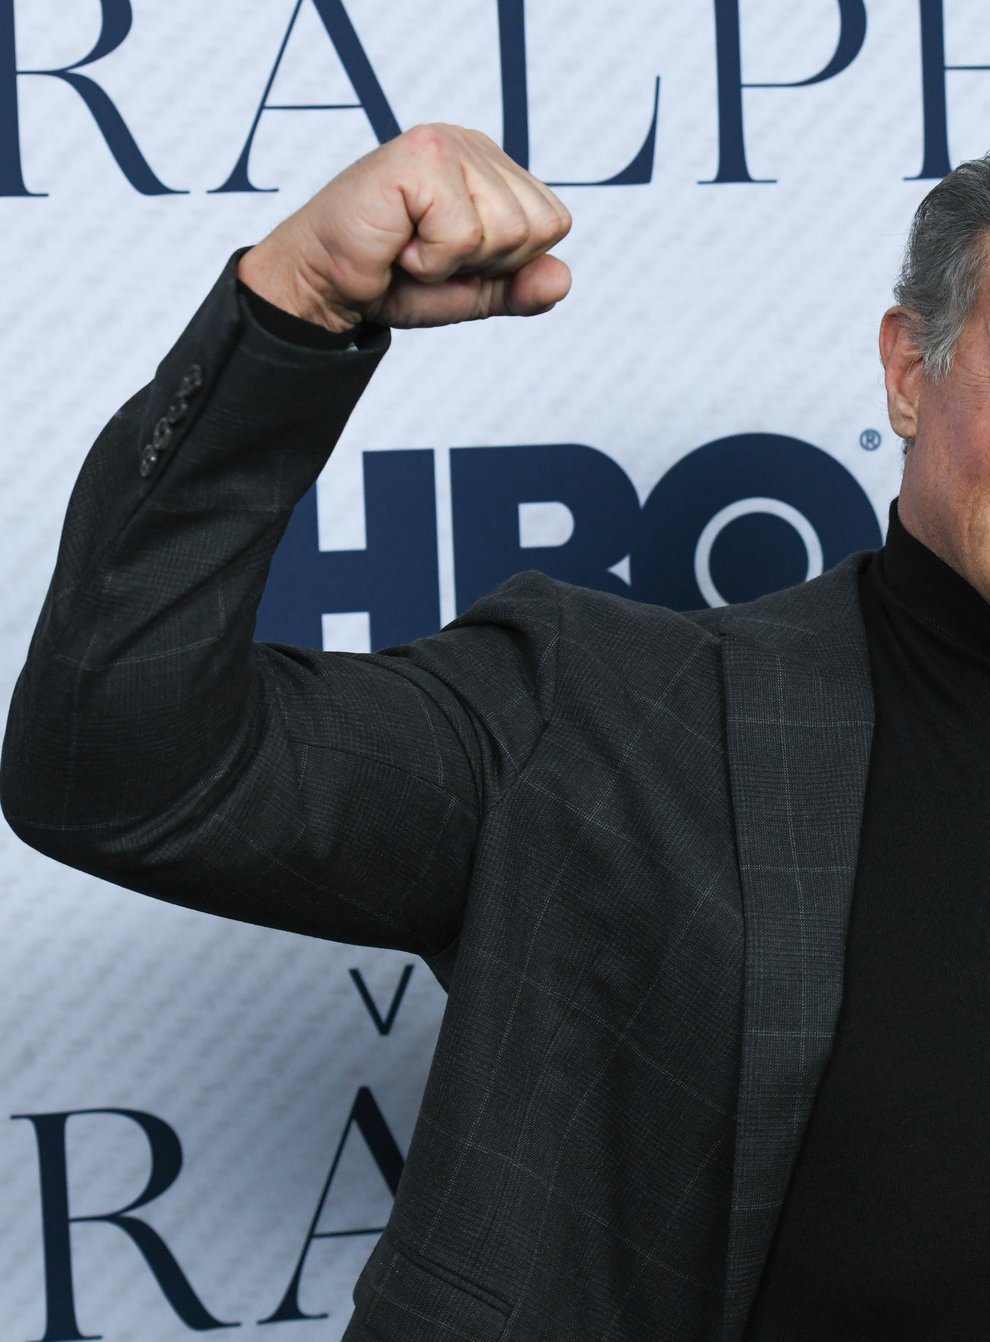 Sylvester Stallone to narrate new documentary about the Rocky films